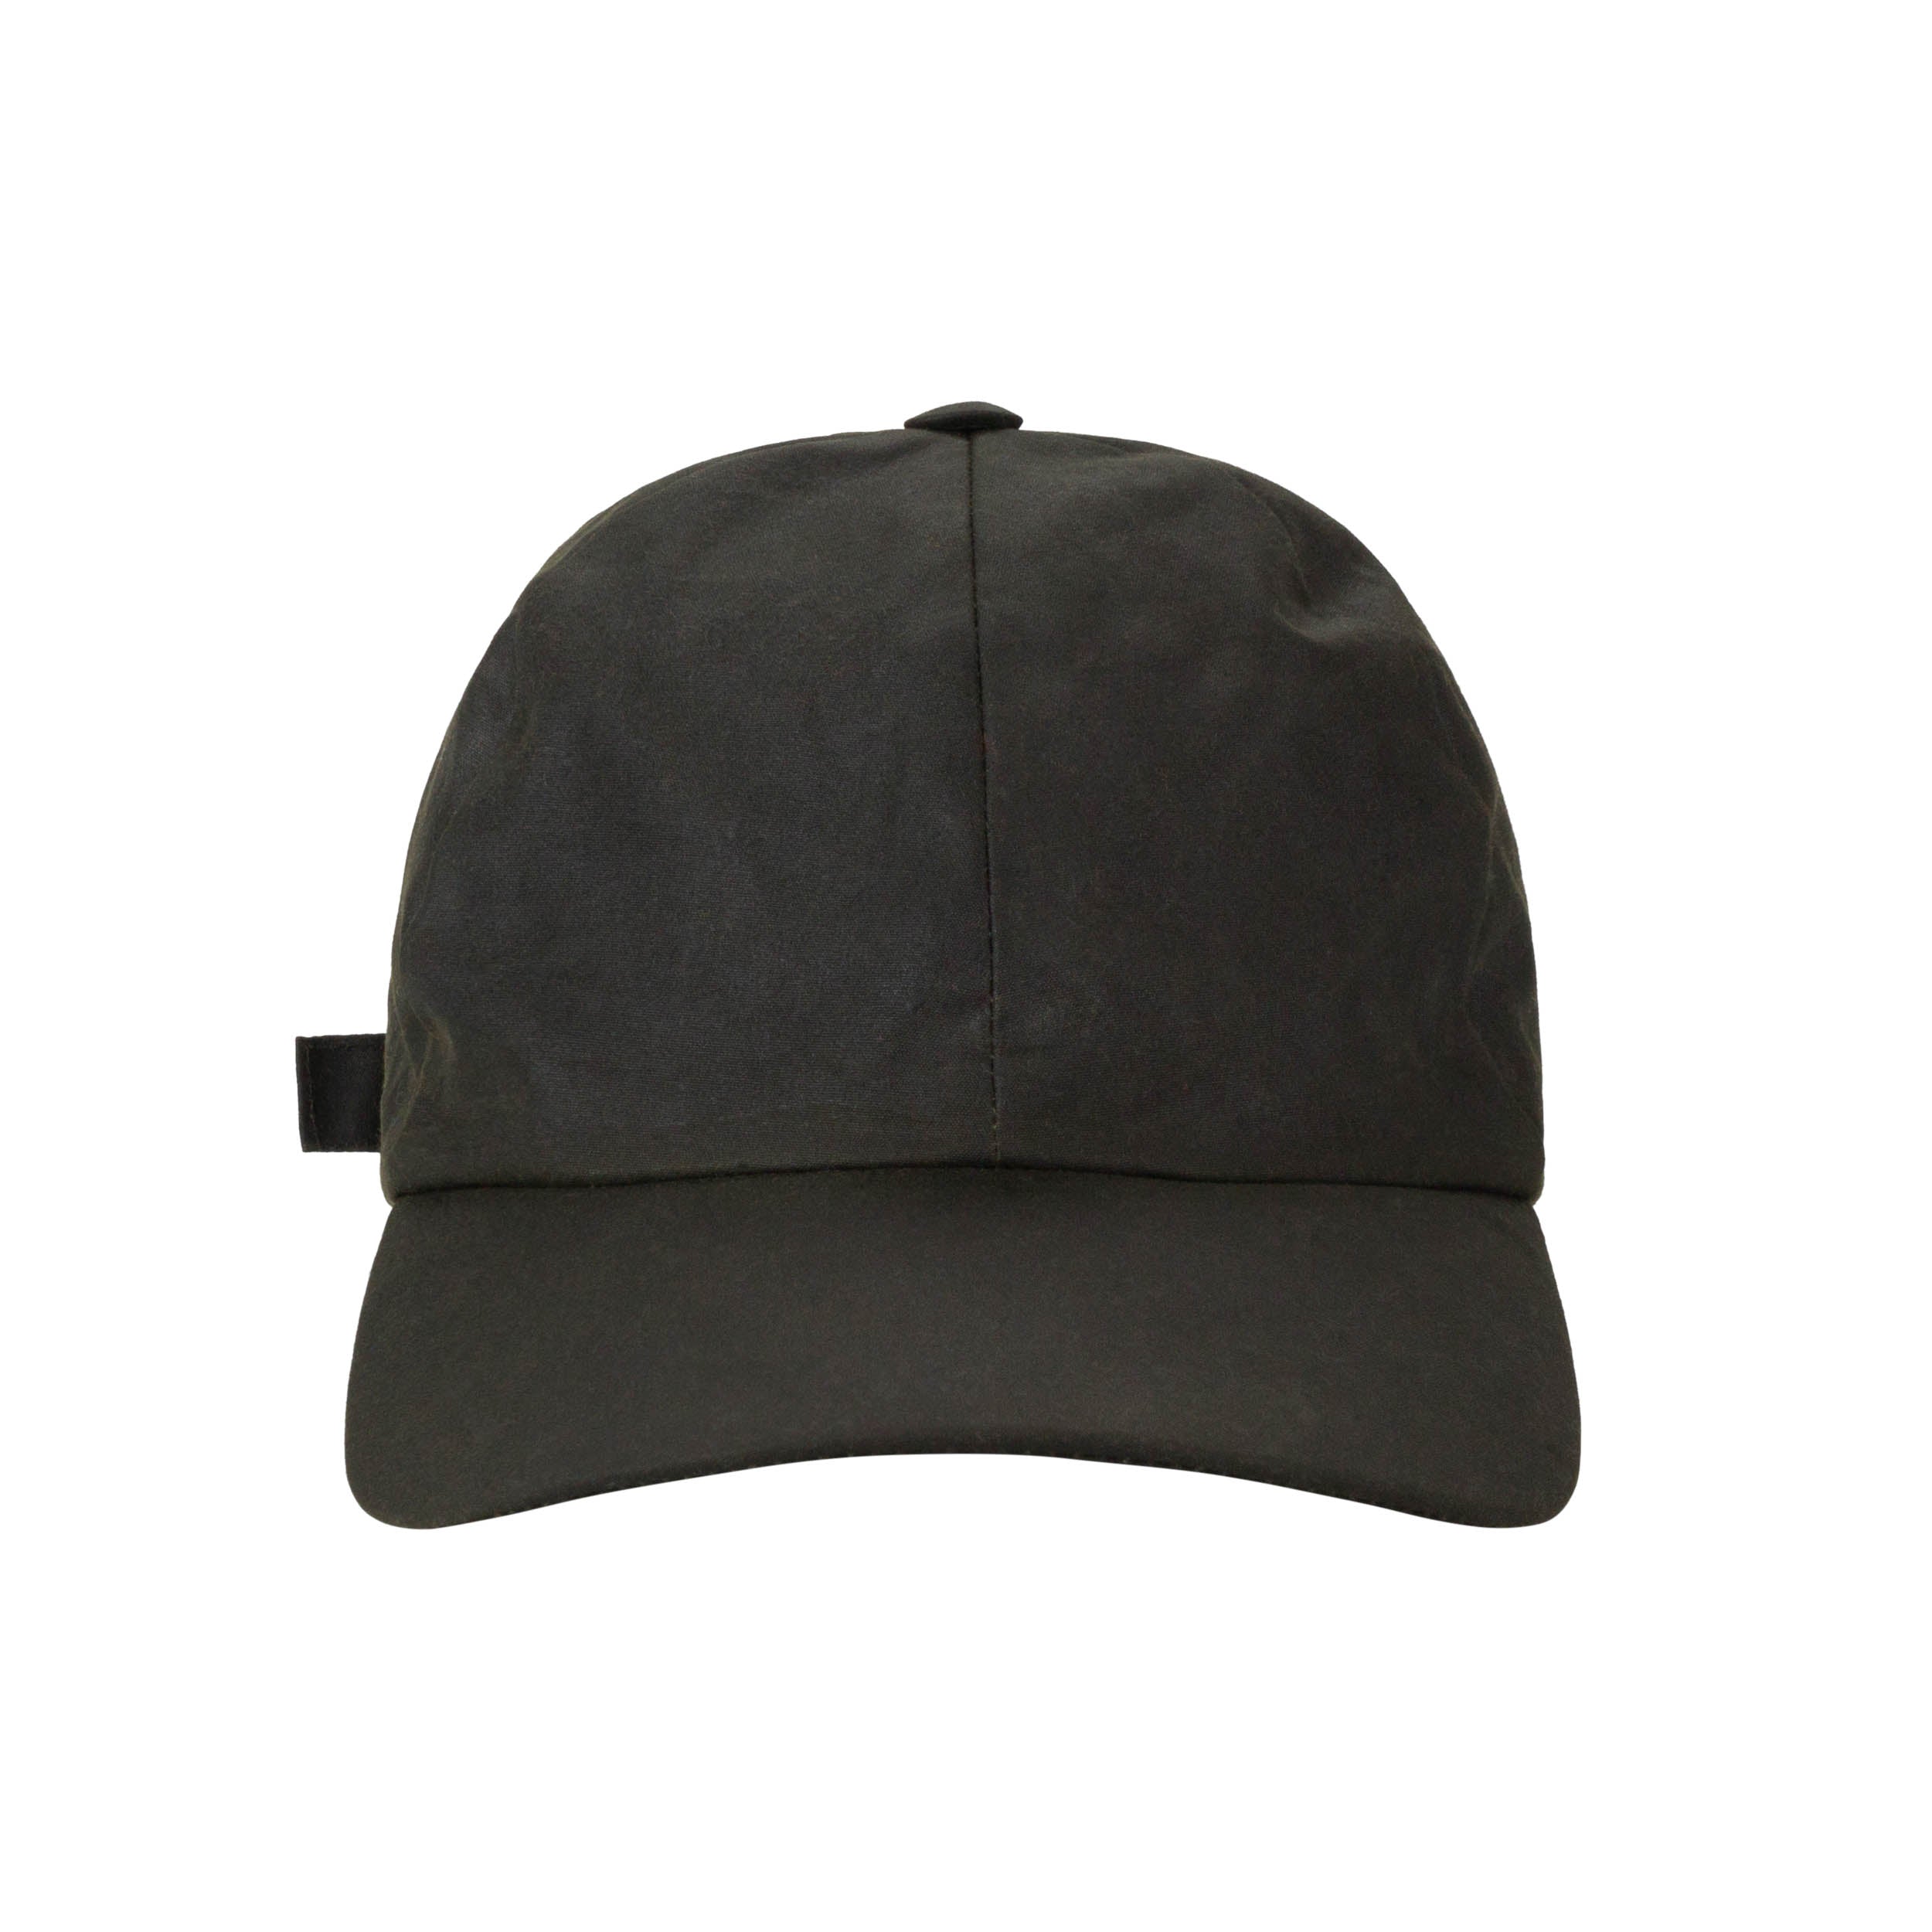 Carrier Company Waxed Cotton Baseball Cap in Dark Olive